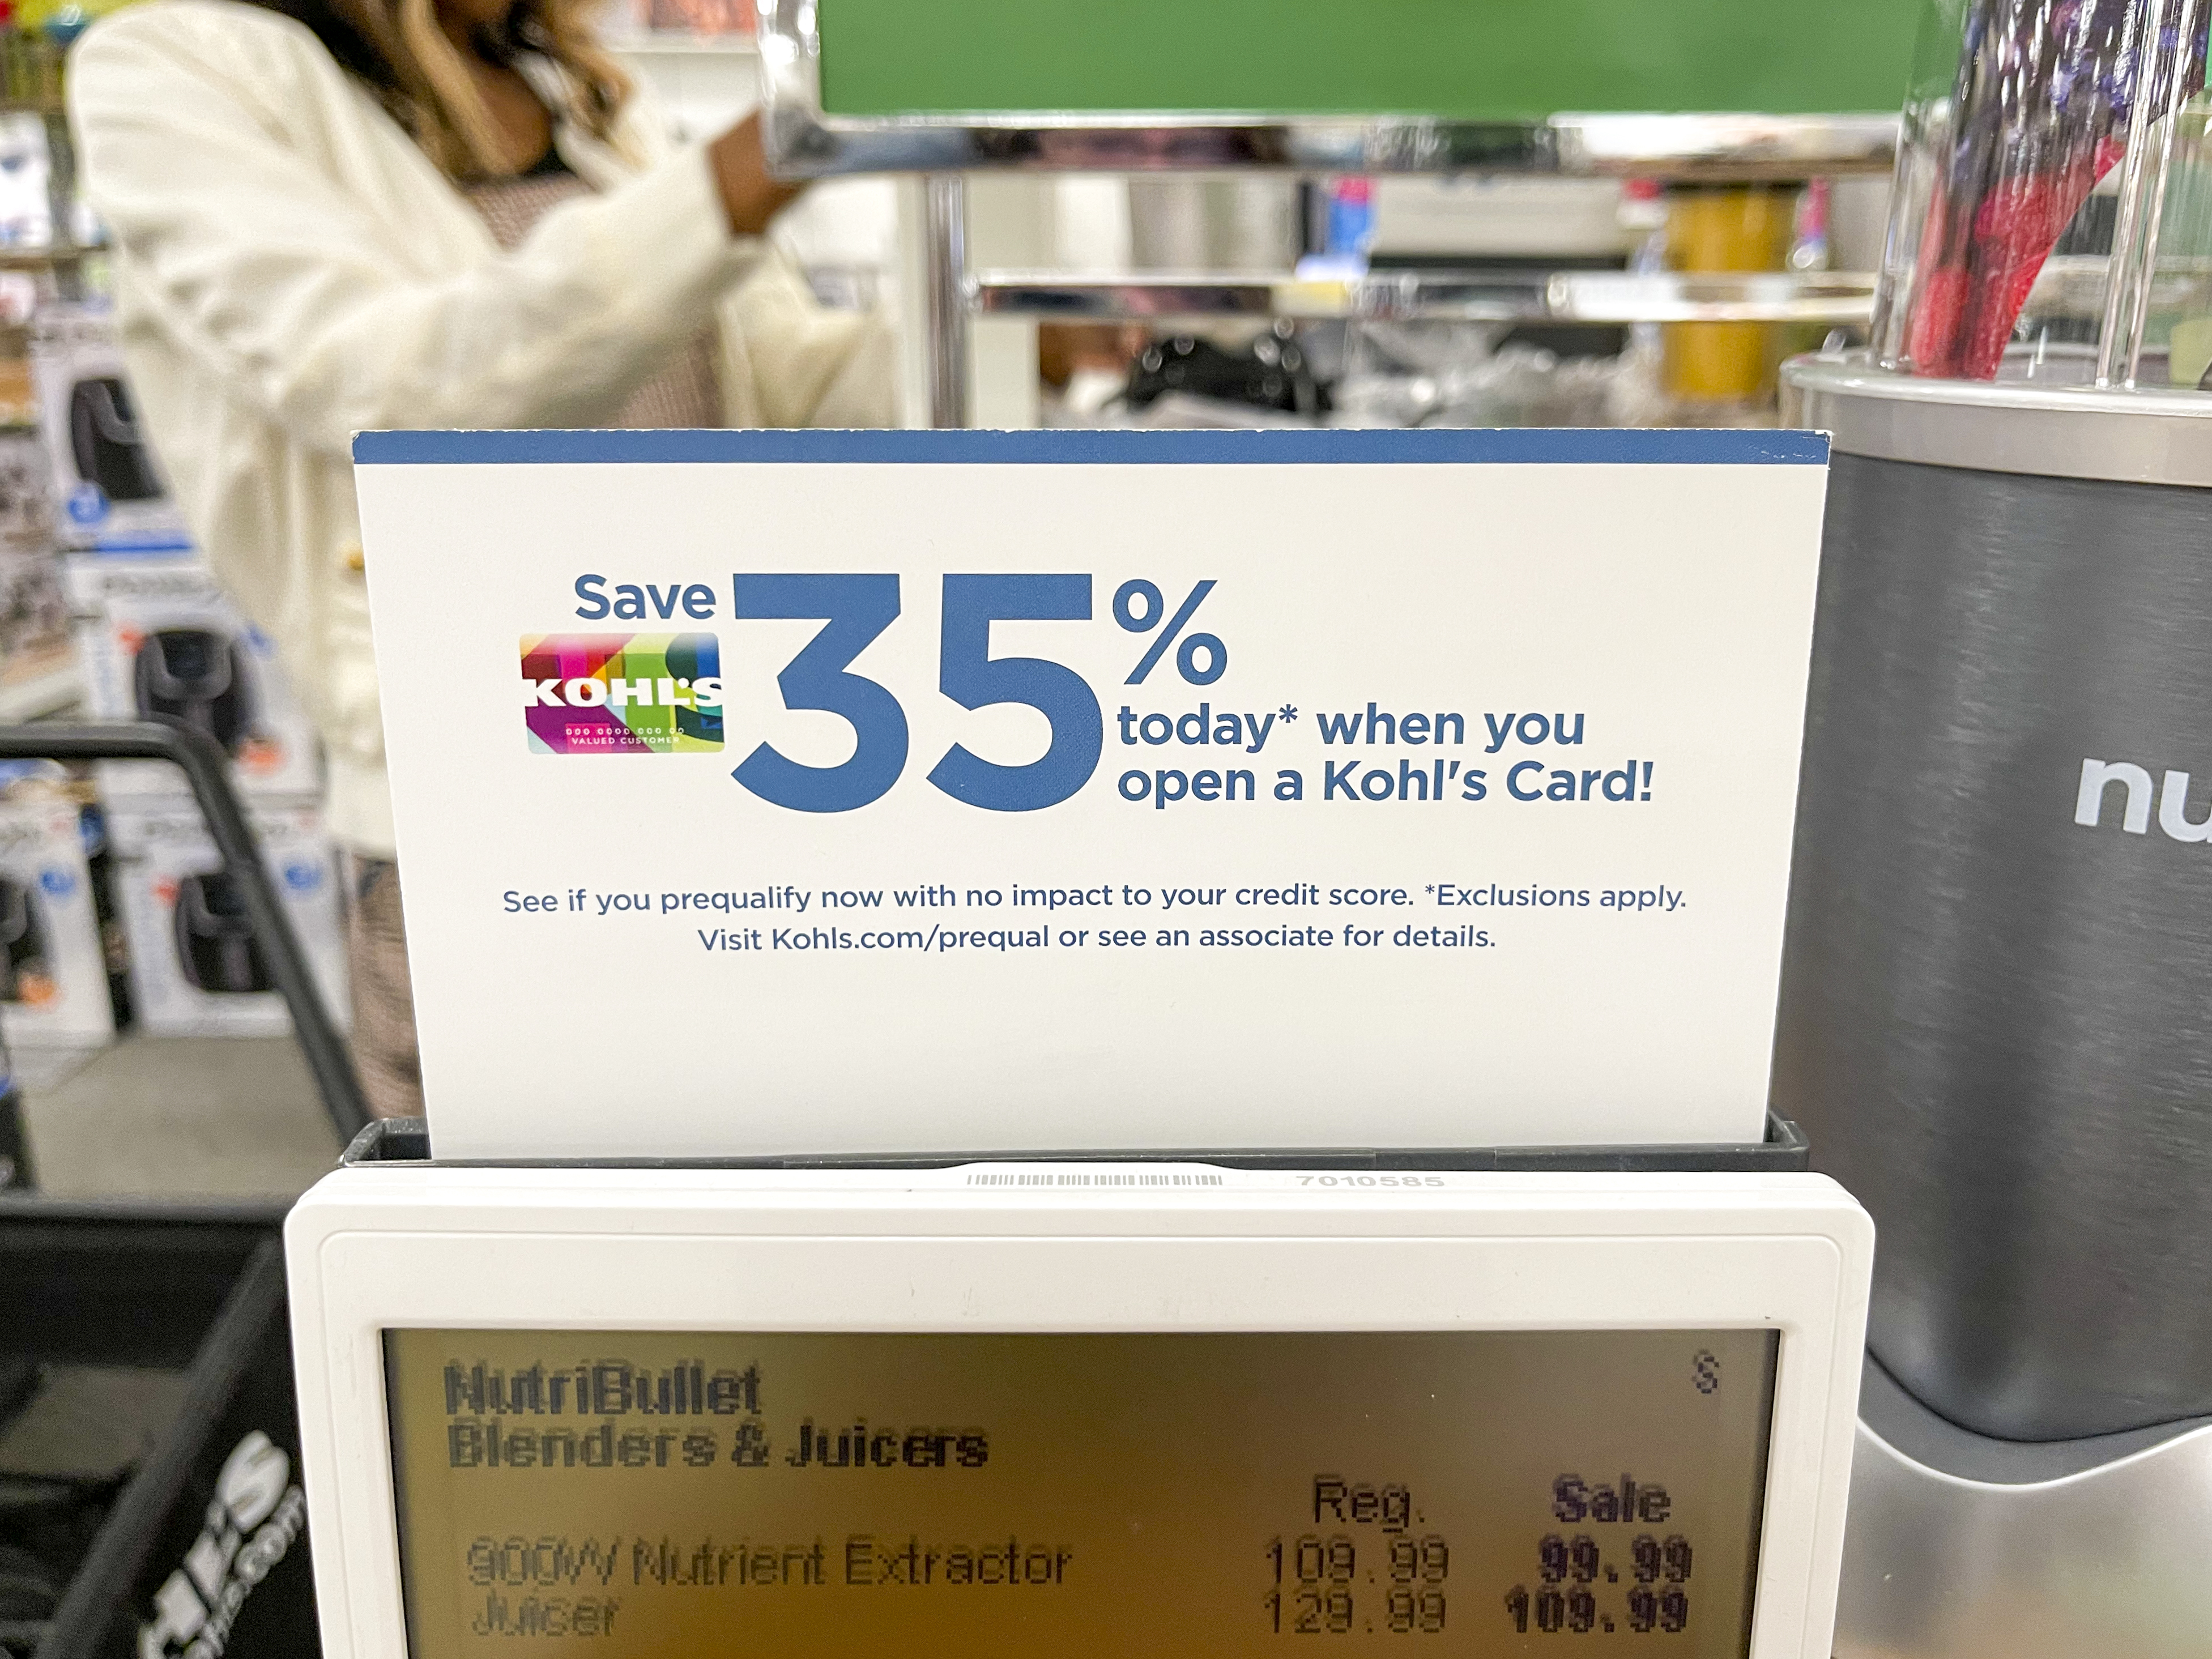 Get & Activate Kohl's Charge Card  Free Online & Printable Coupons, Promo  Codes